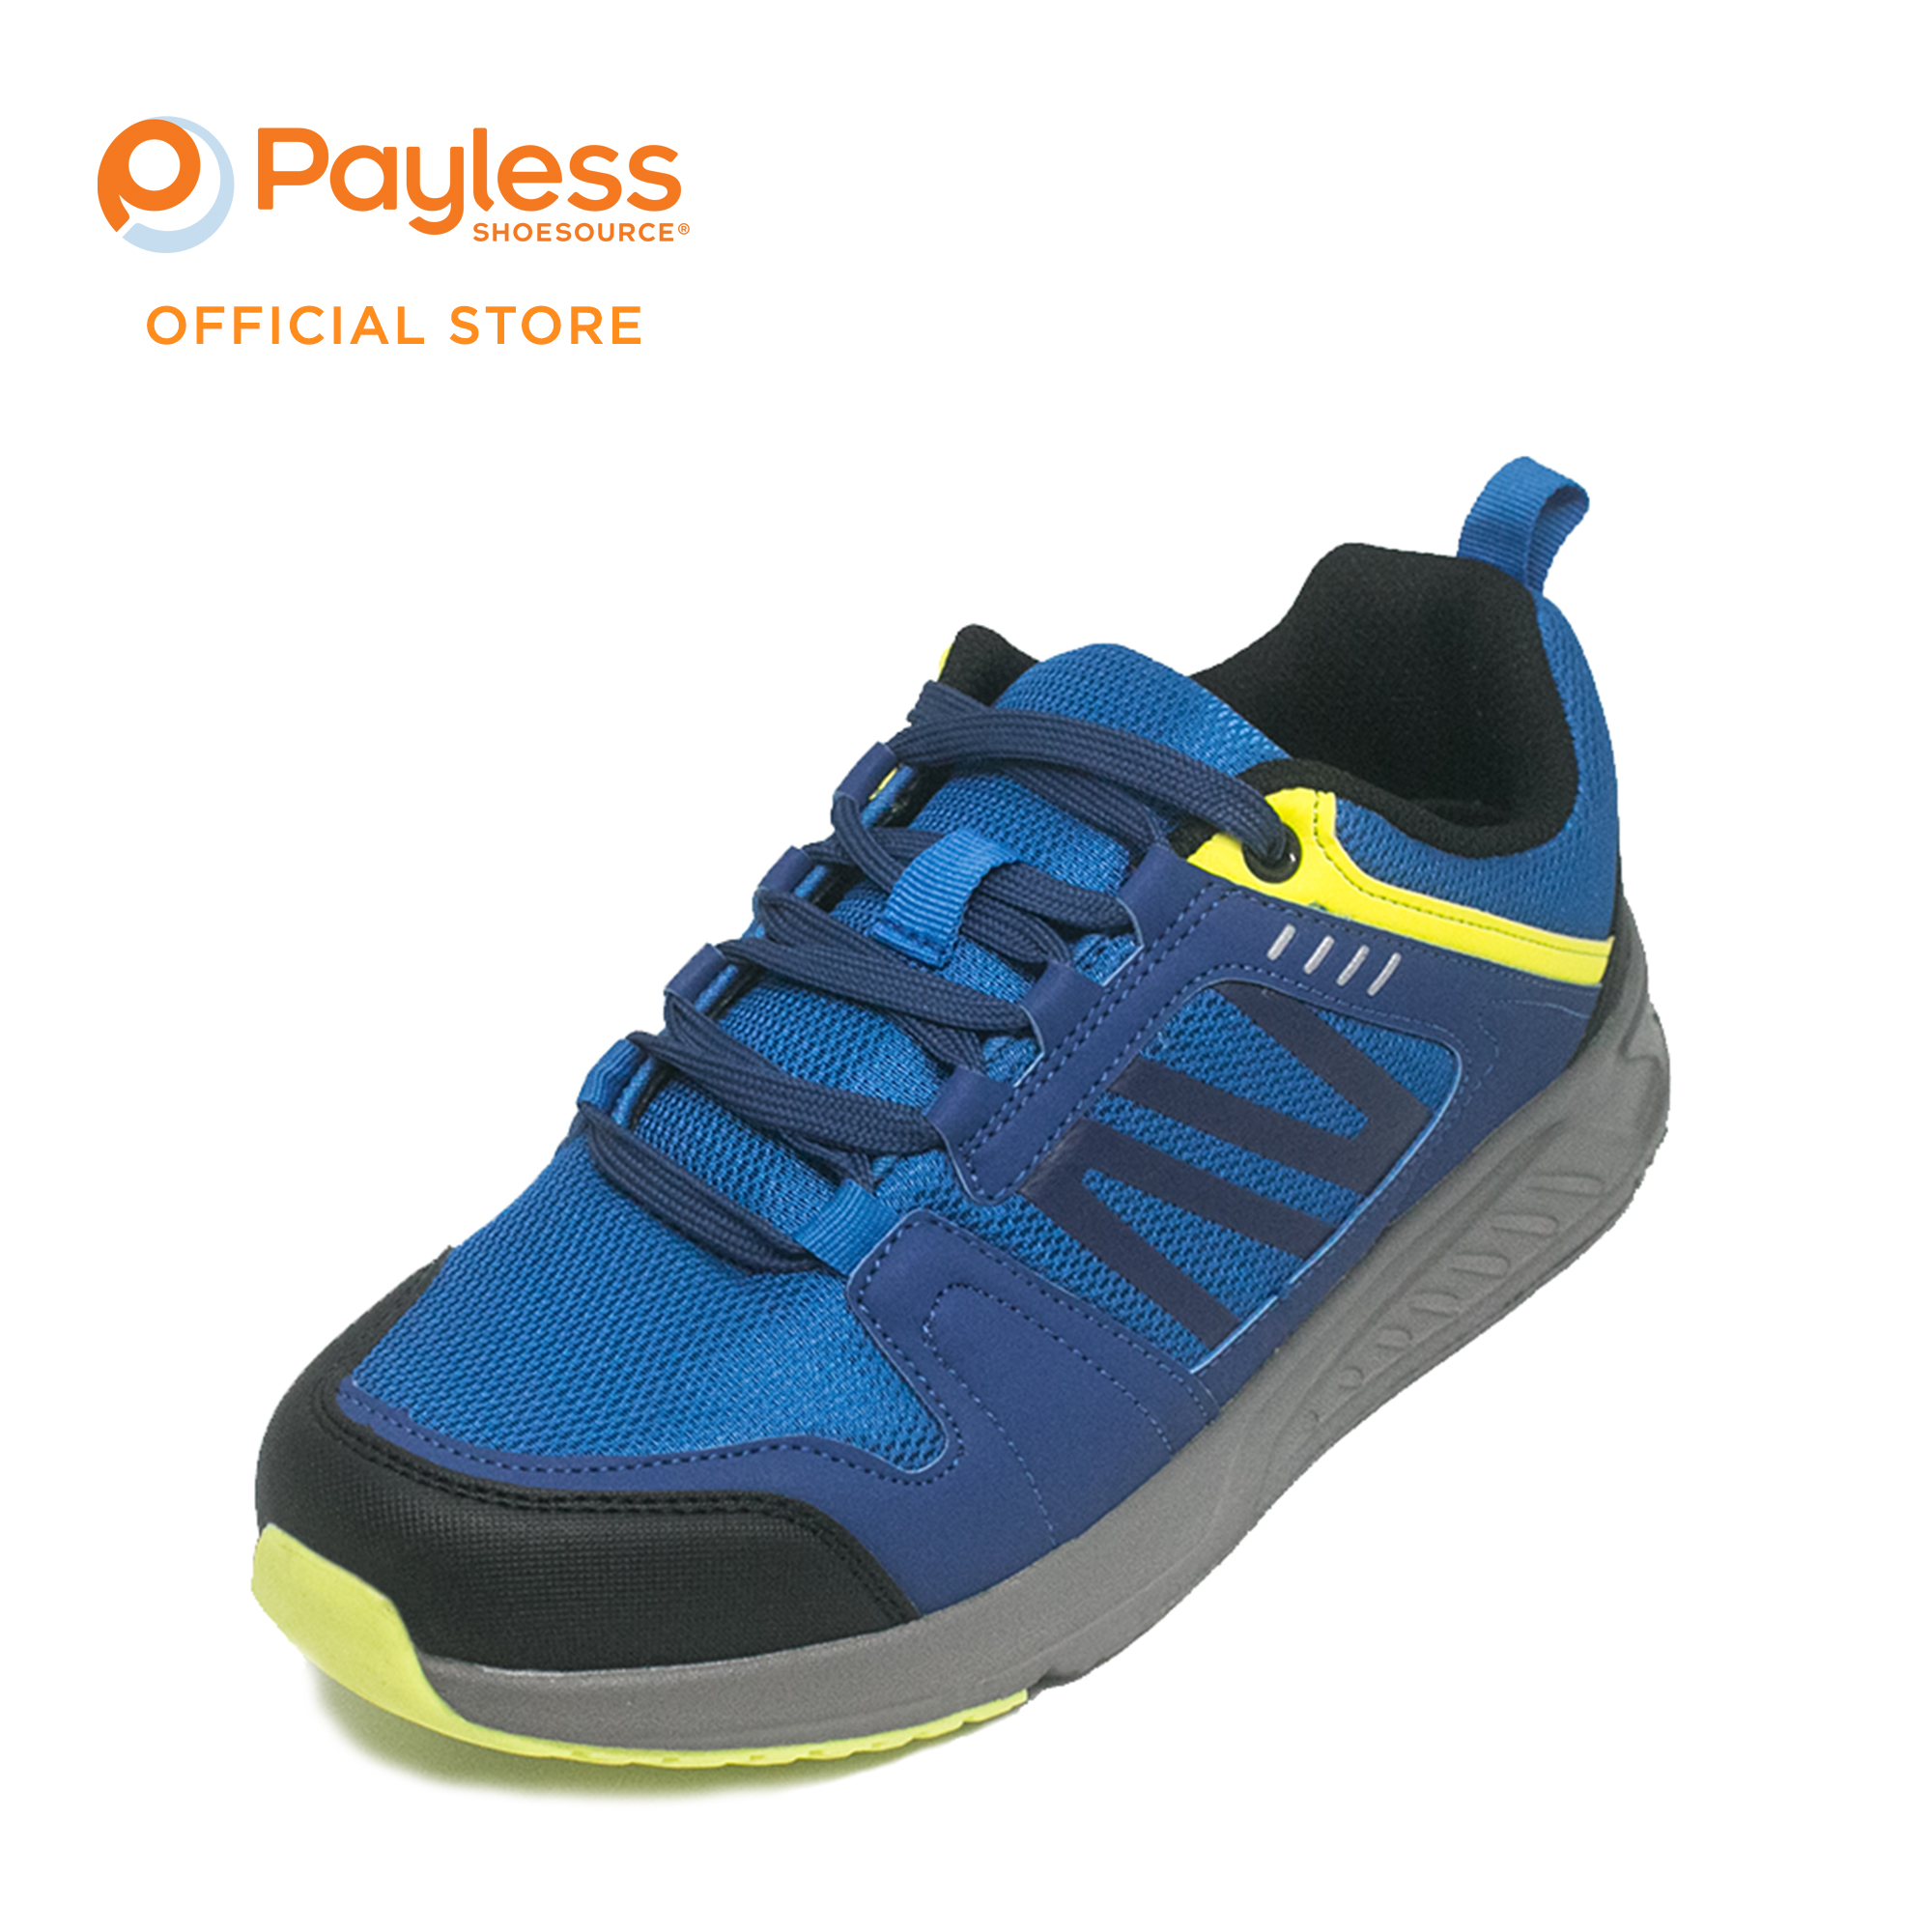 Buy Payless Running Shoes Online 